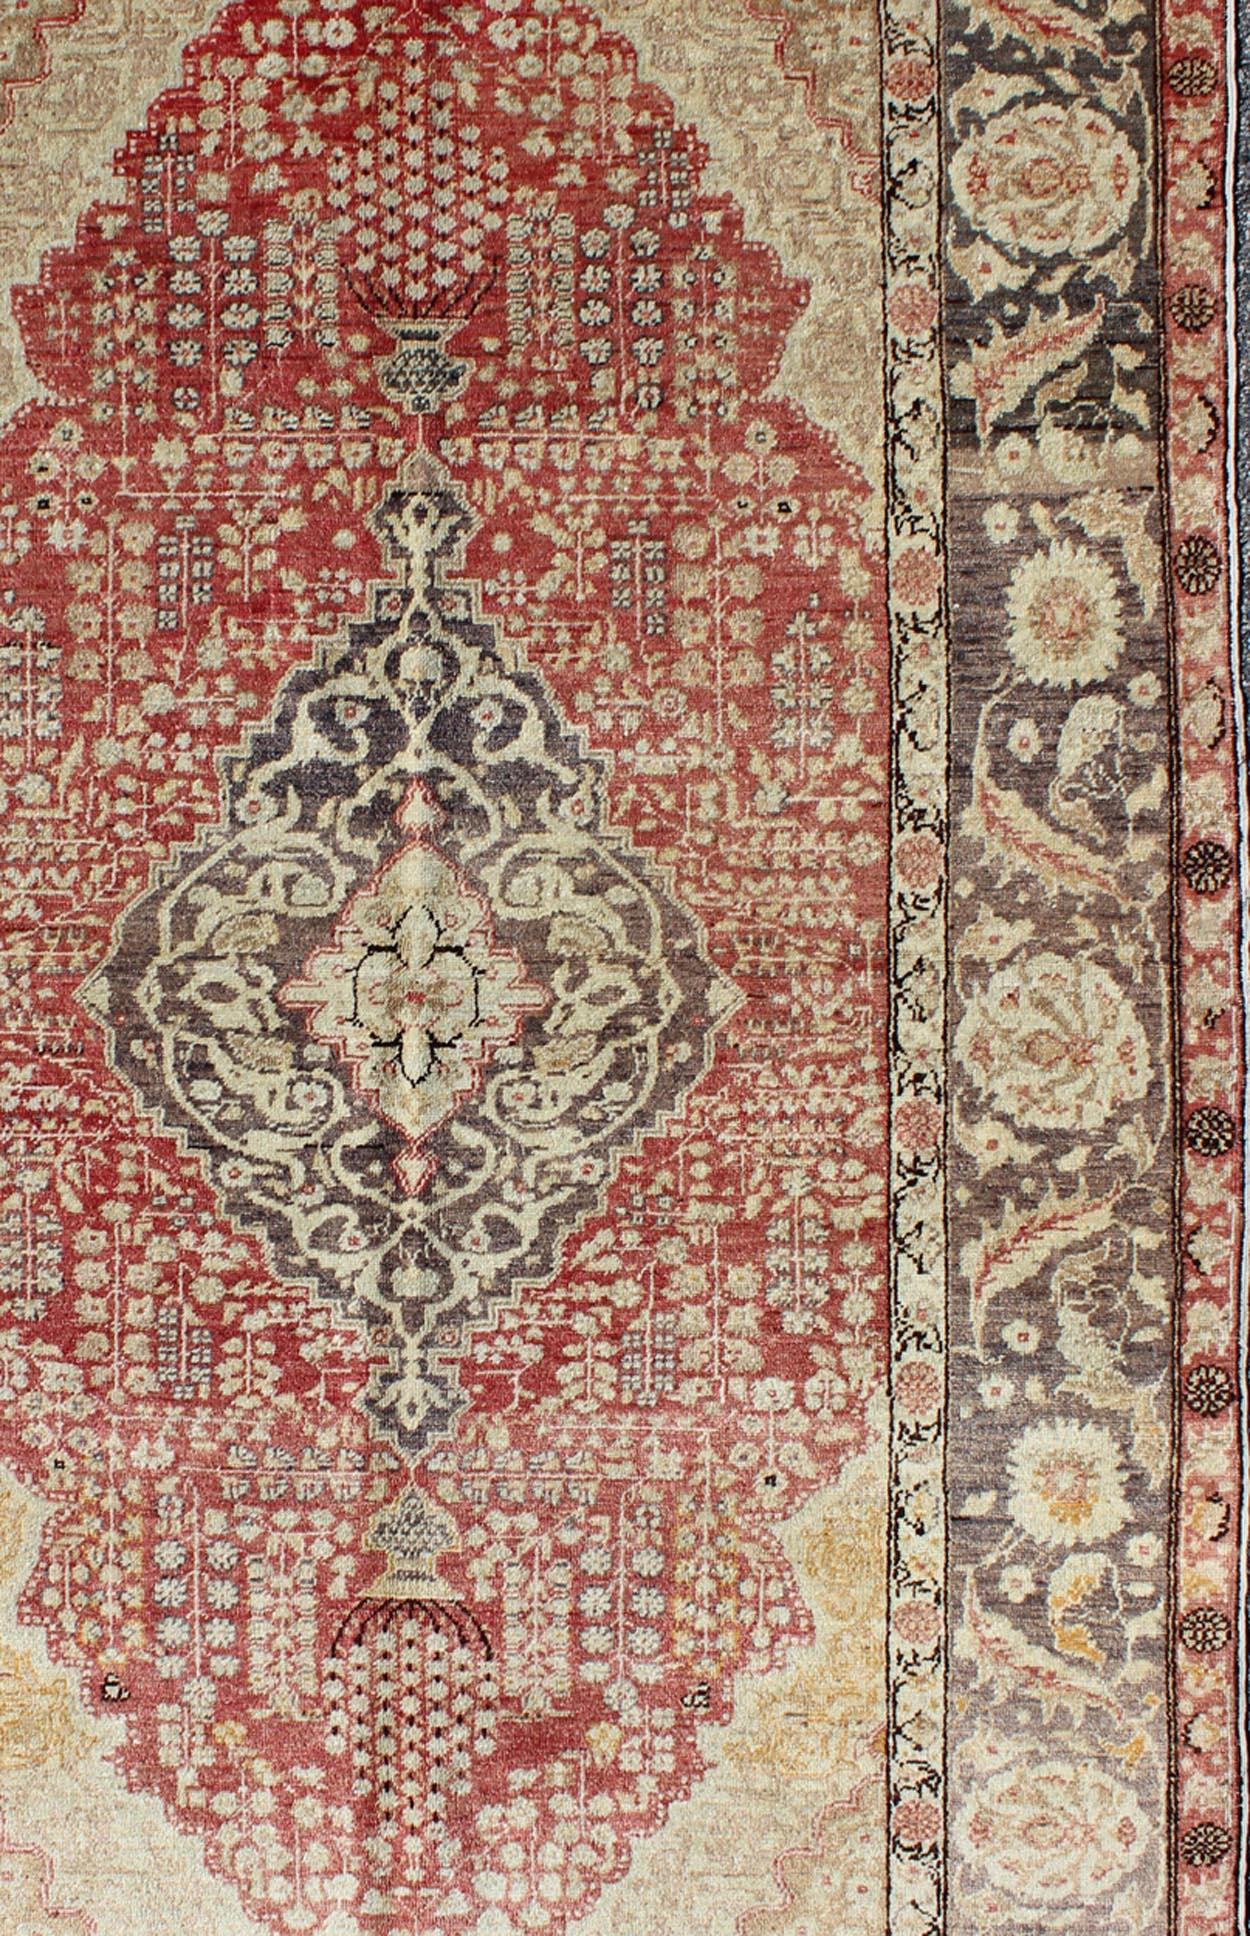 Antique Turkish Oushak Rug with Floral Medallion Design in Red and Charcoal In Good Condition For Sale In Atlanta, GA